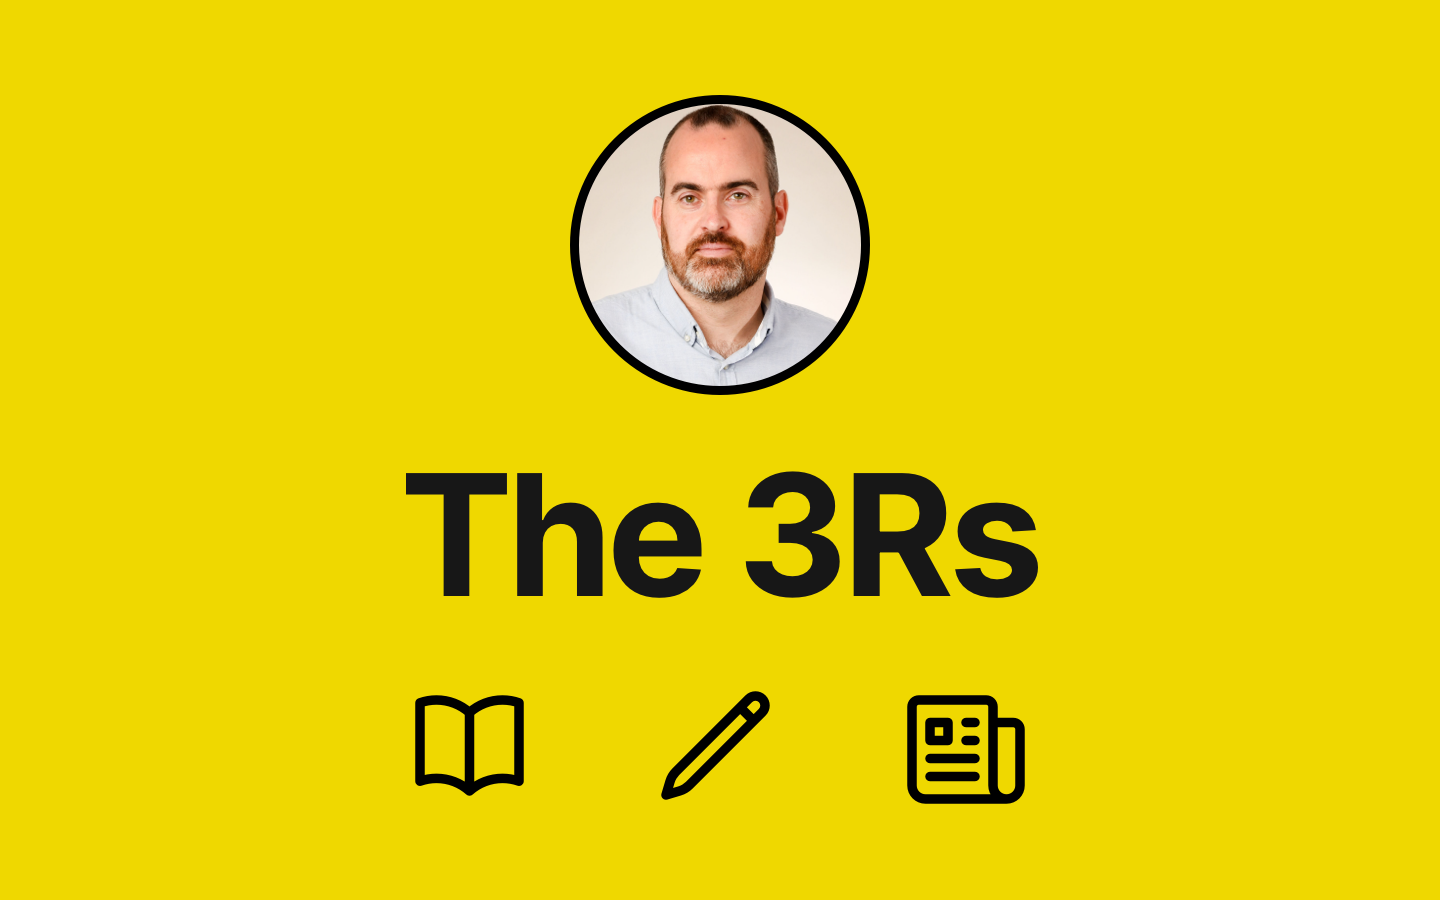 The 3Rs - Reading, w®iting, and research to be interested in #31 feature image